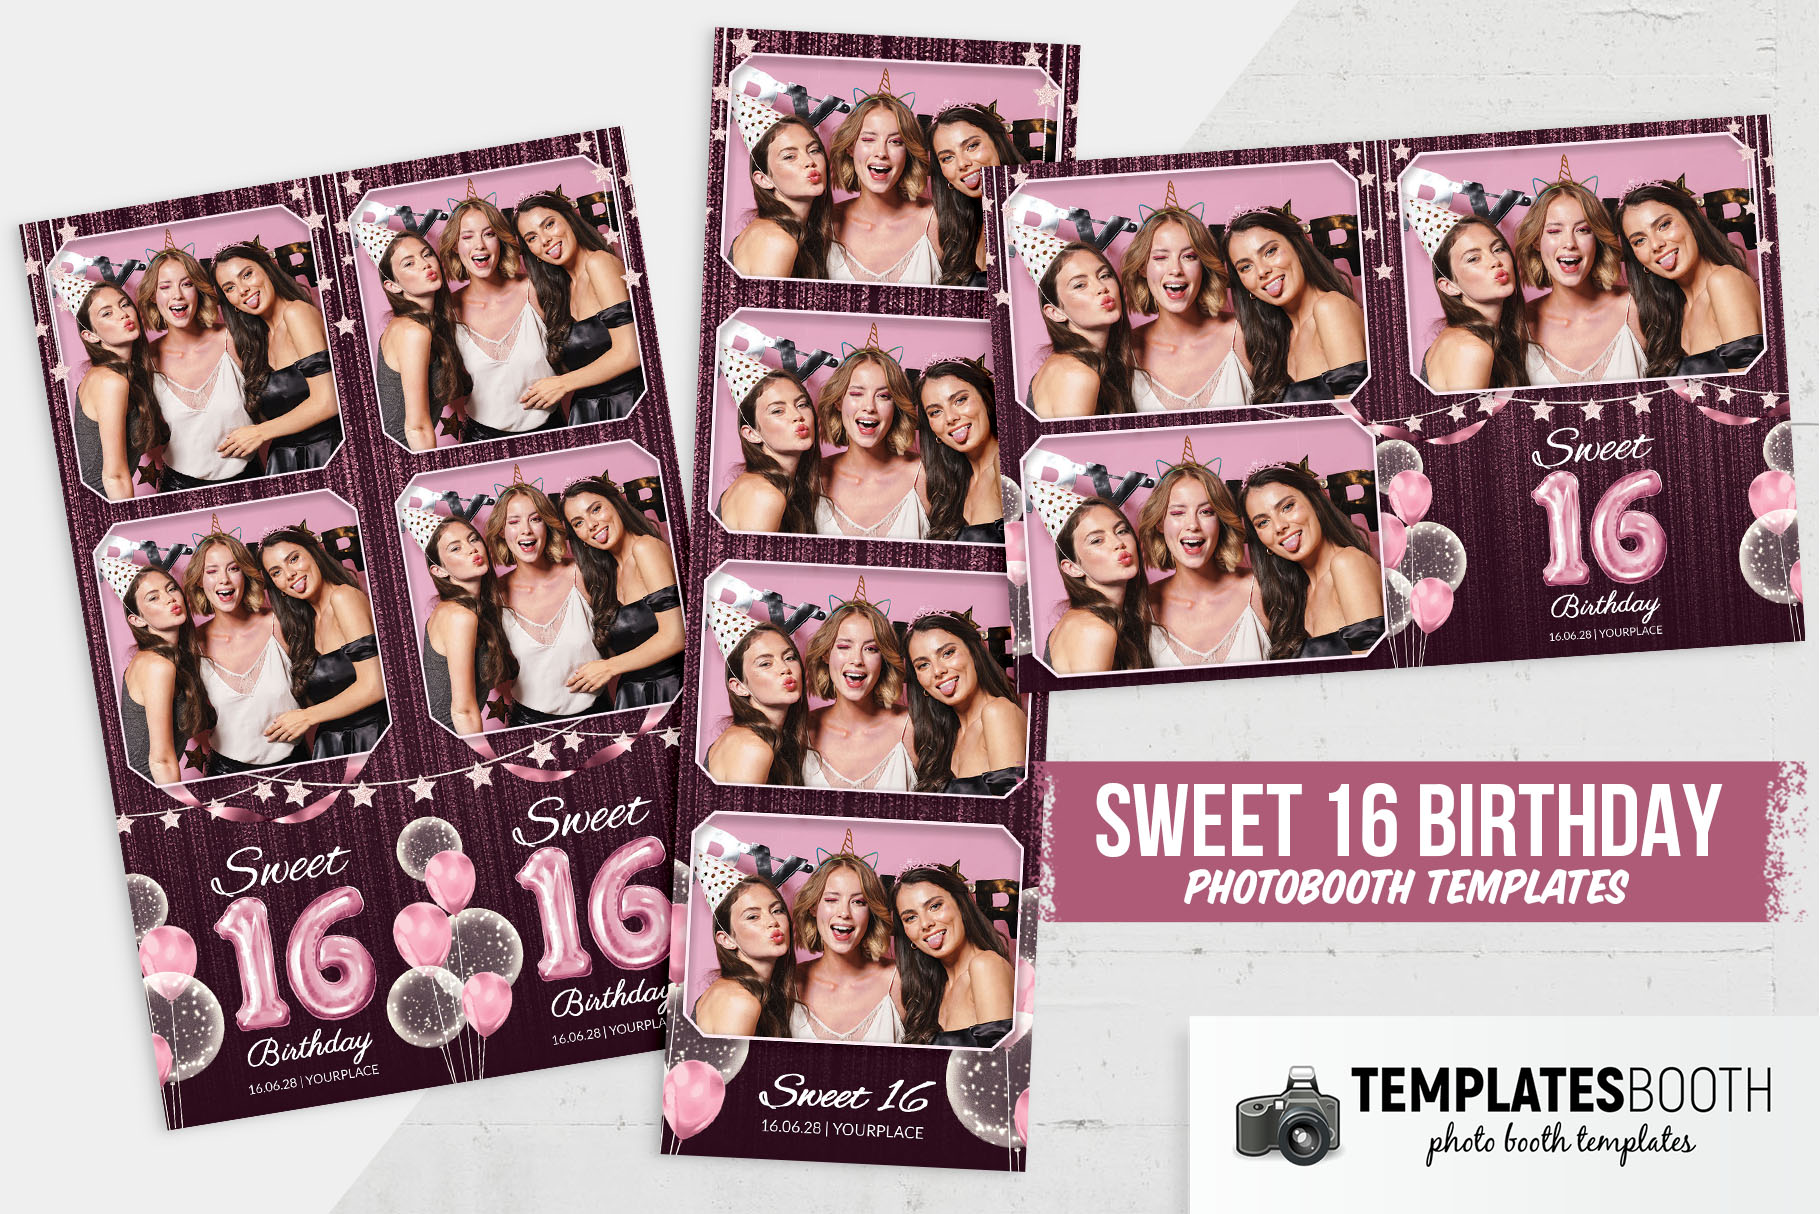 sweet-16-photo-booth-template-archives-templatesbooth